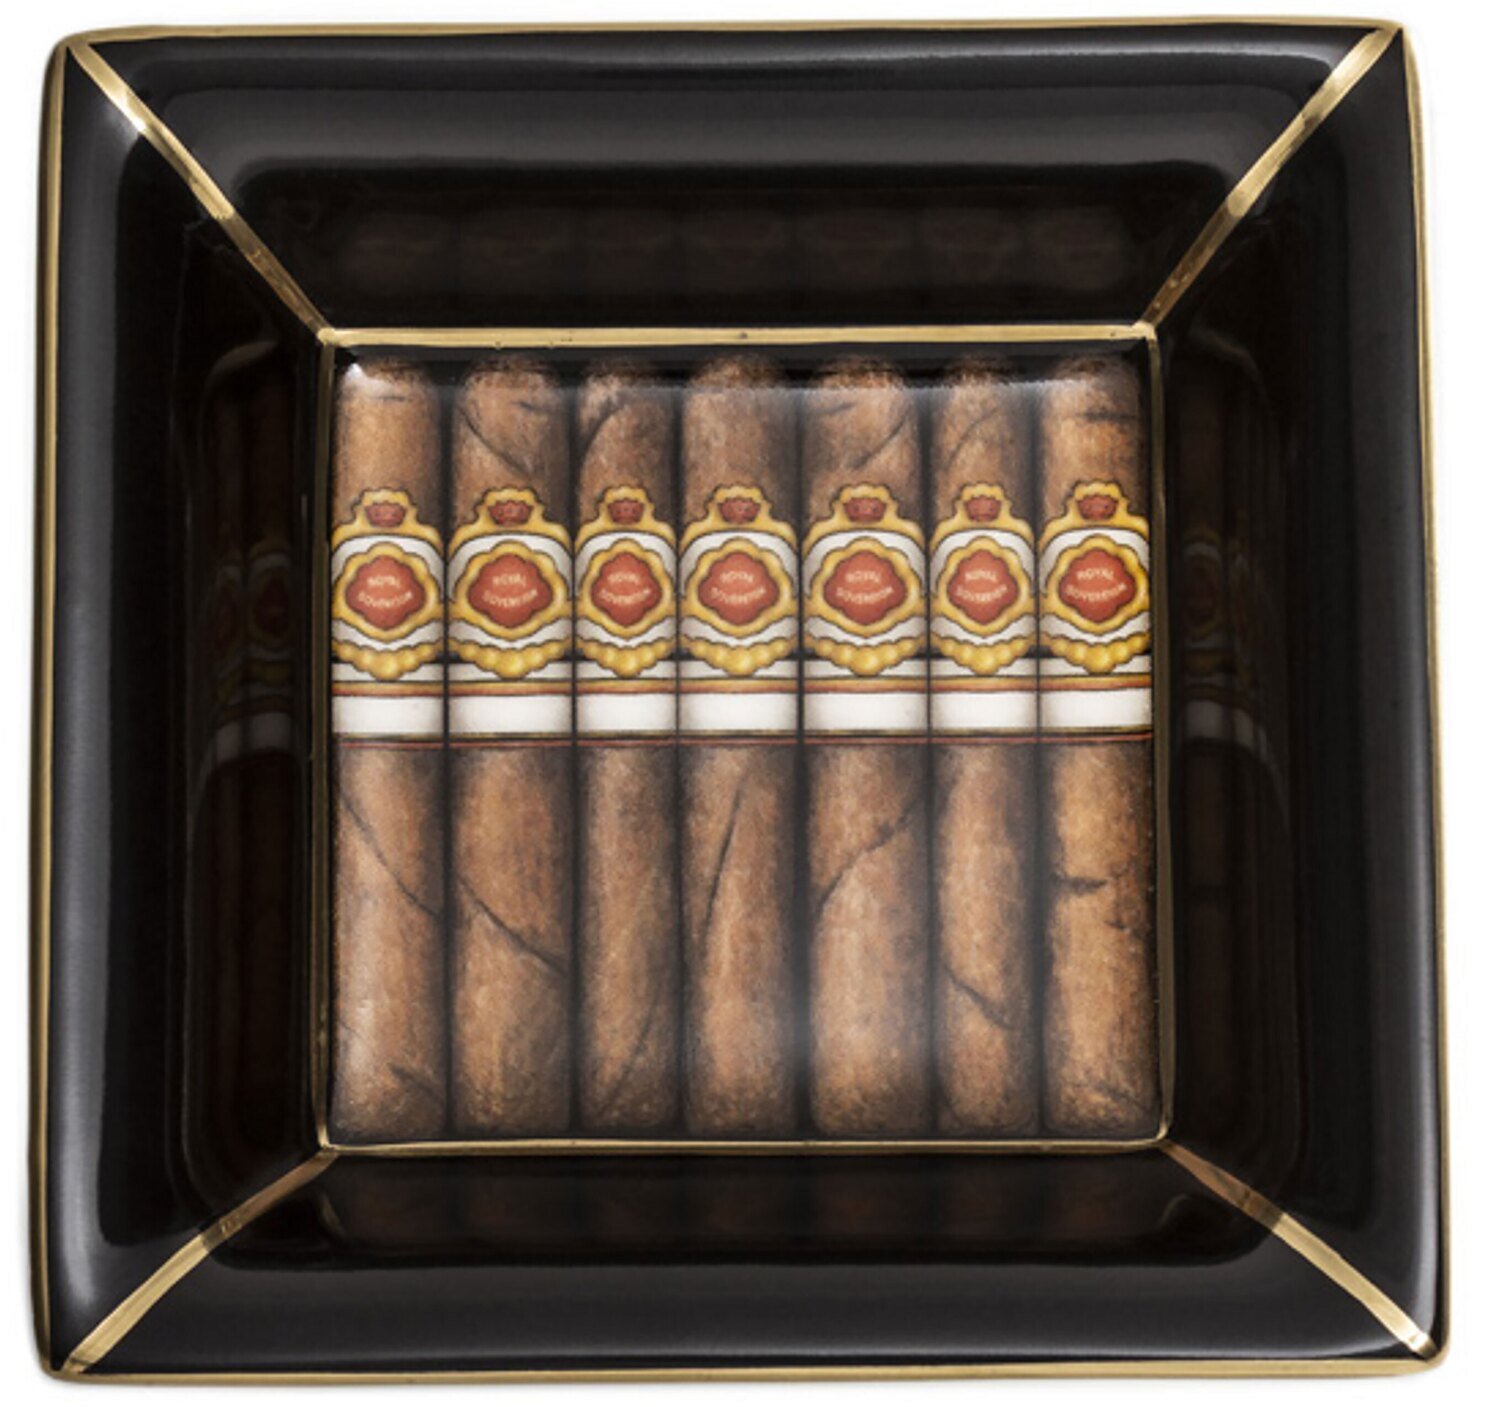 Halcyon Days Cigars Square Tray BCCIG02STG